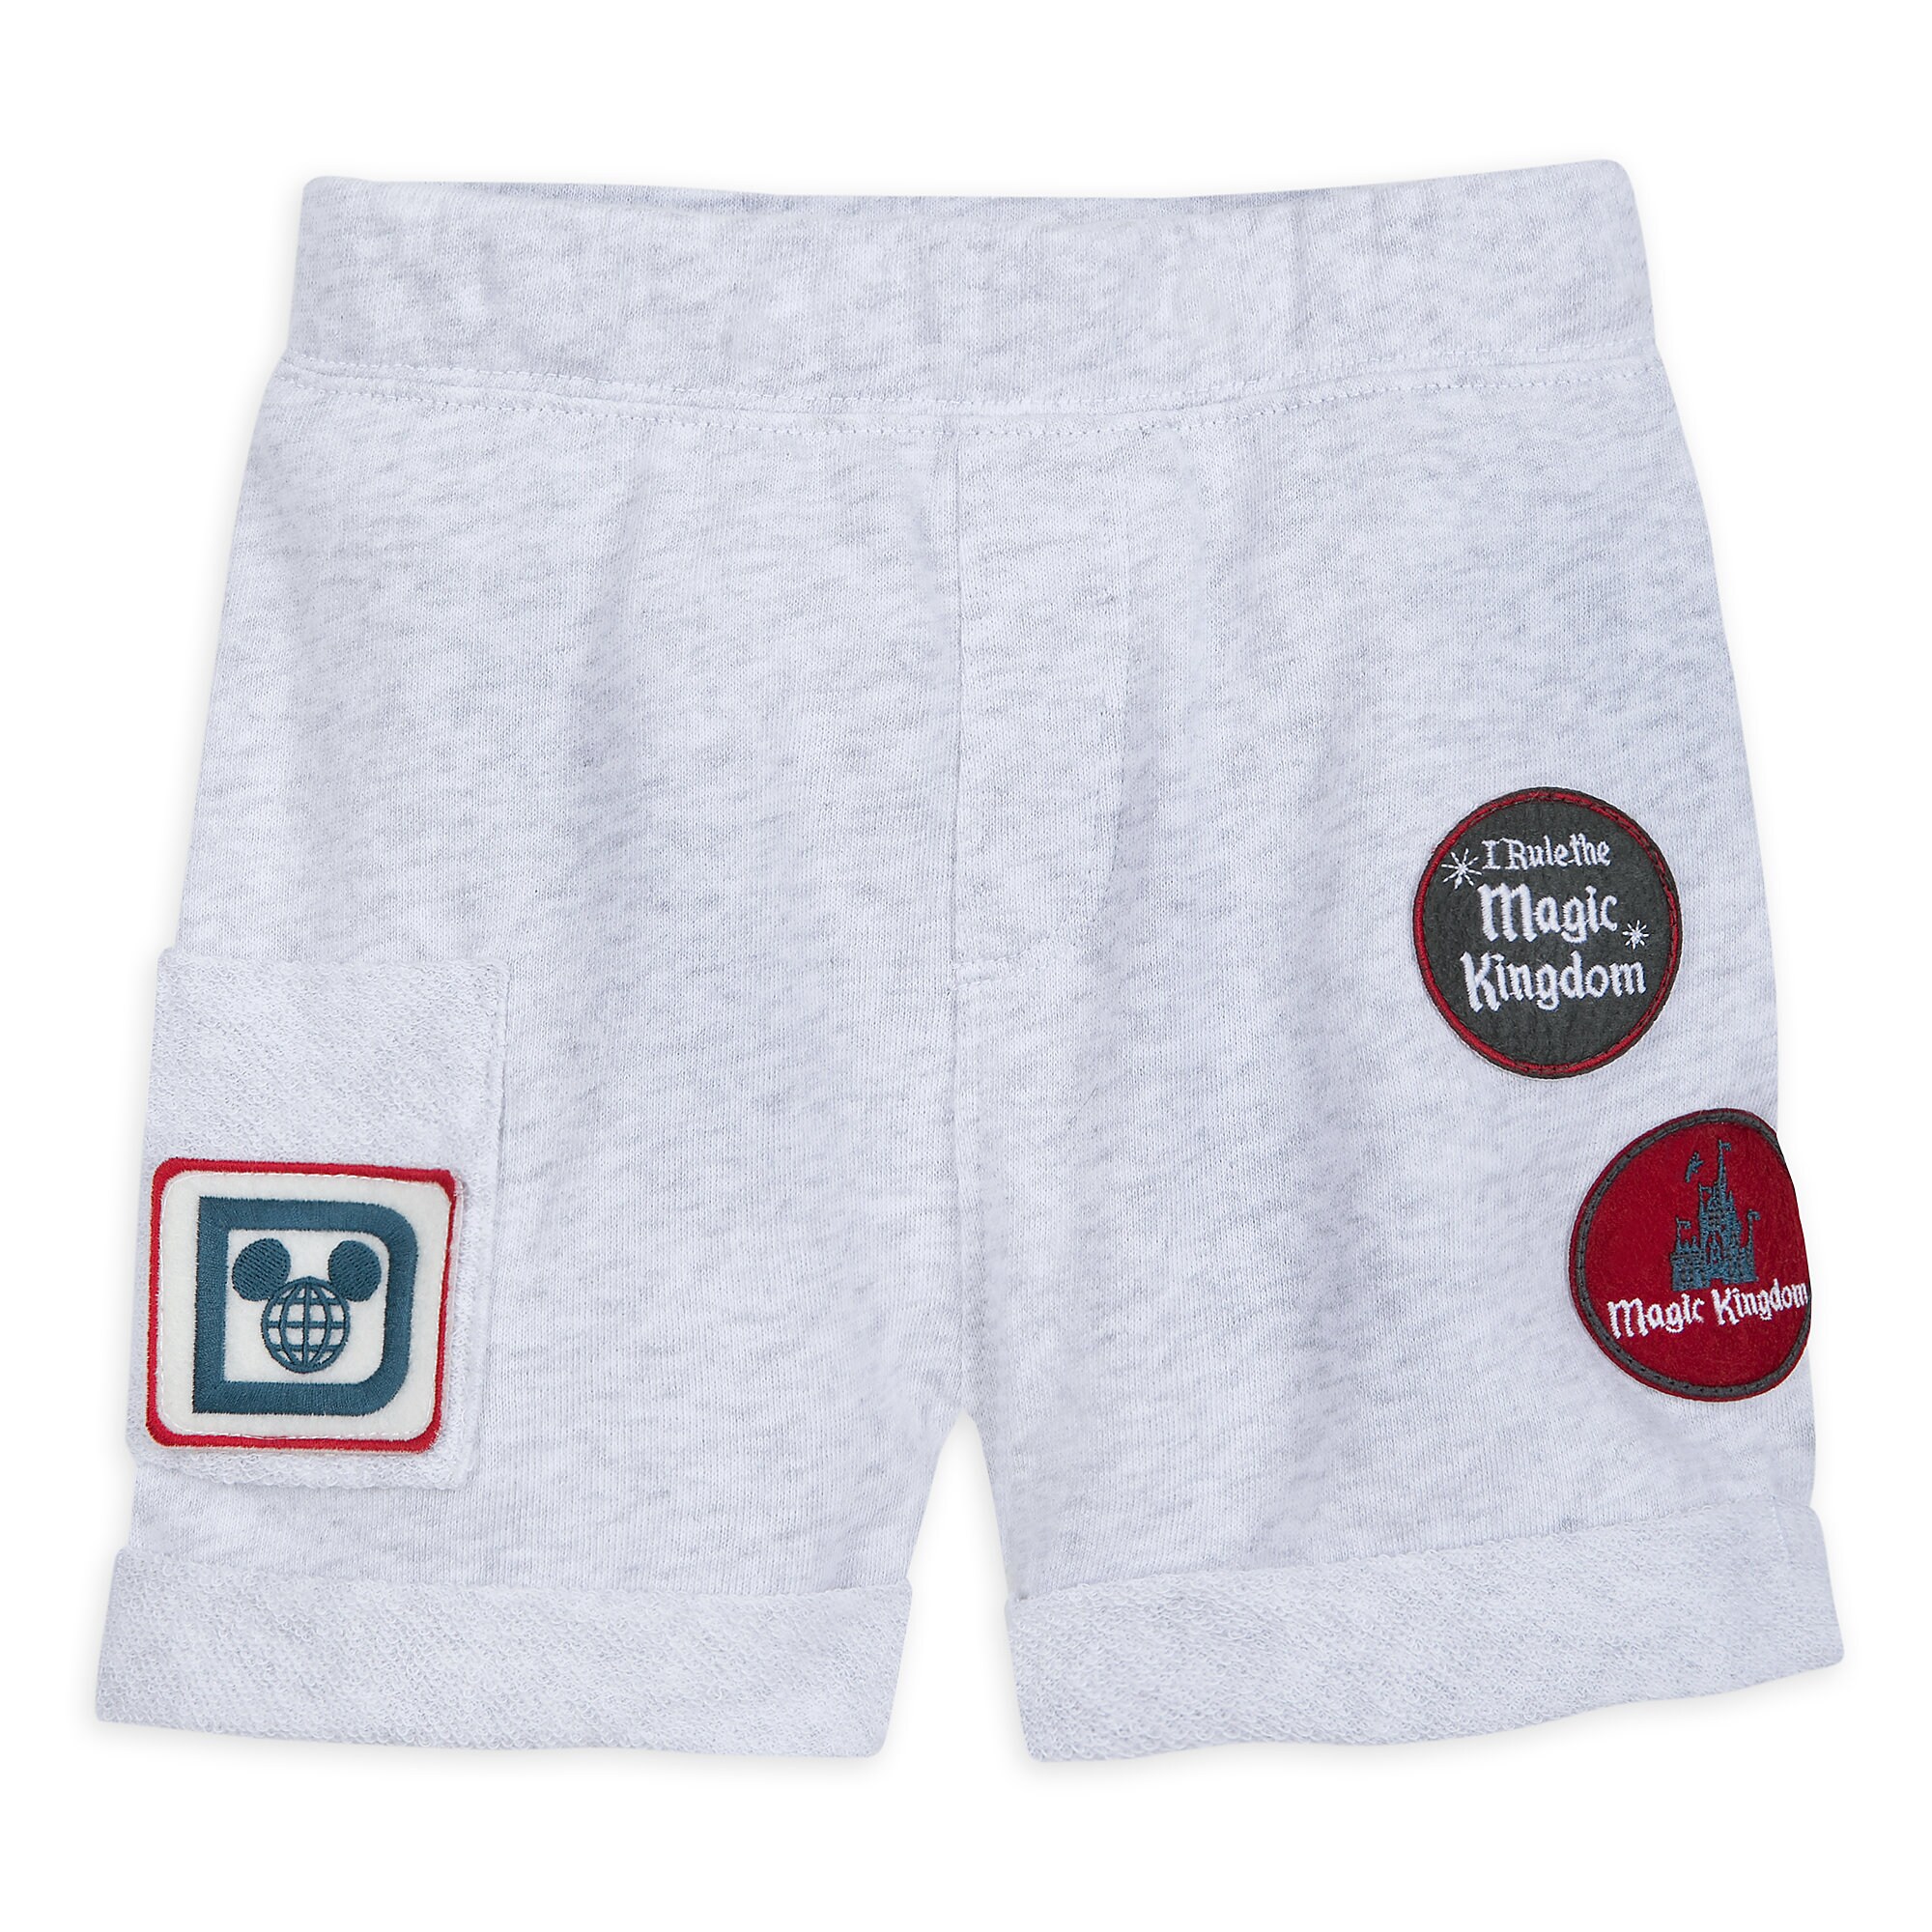 Magic Kingdom Shorts for Baby by Junk Food